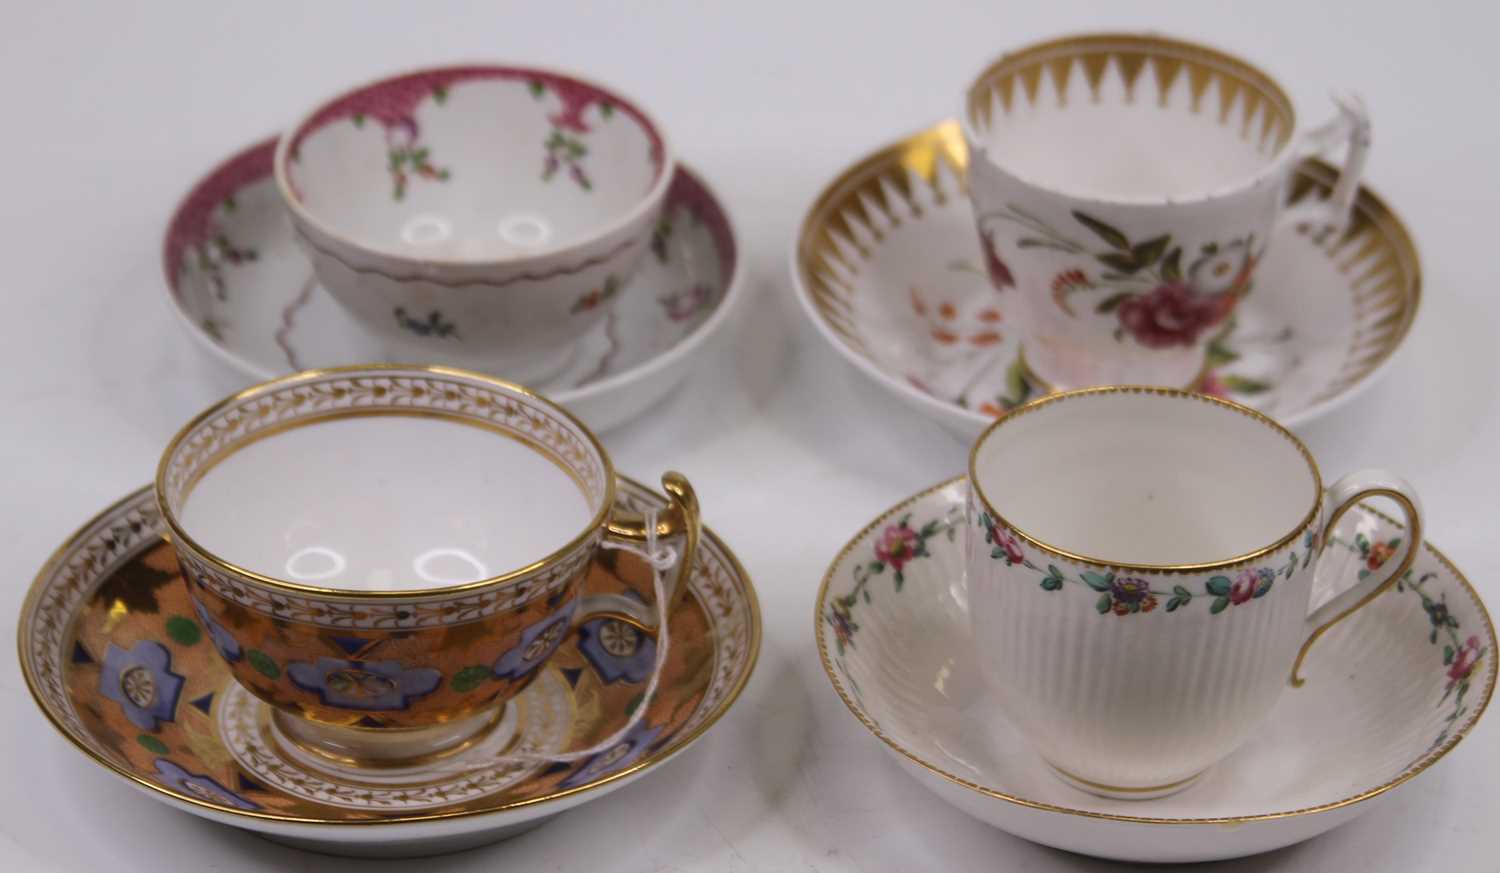 A JW Ridgeway Golden Ride pattern porcelain teacup and saucer, circa 1810, together with an 18th